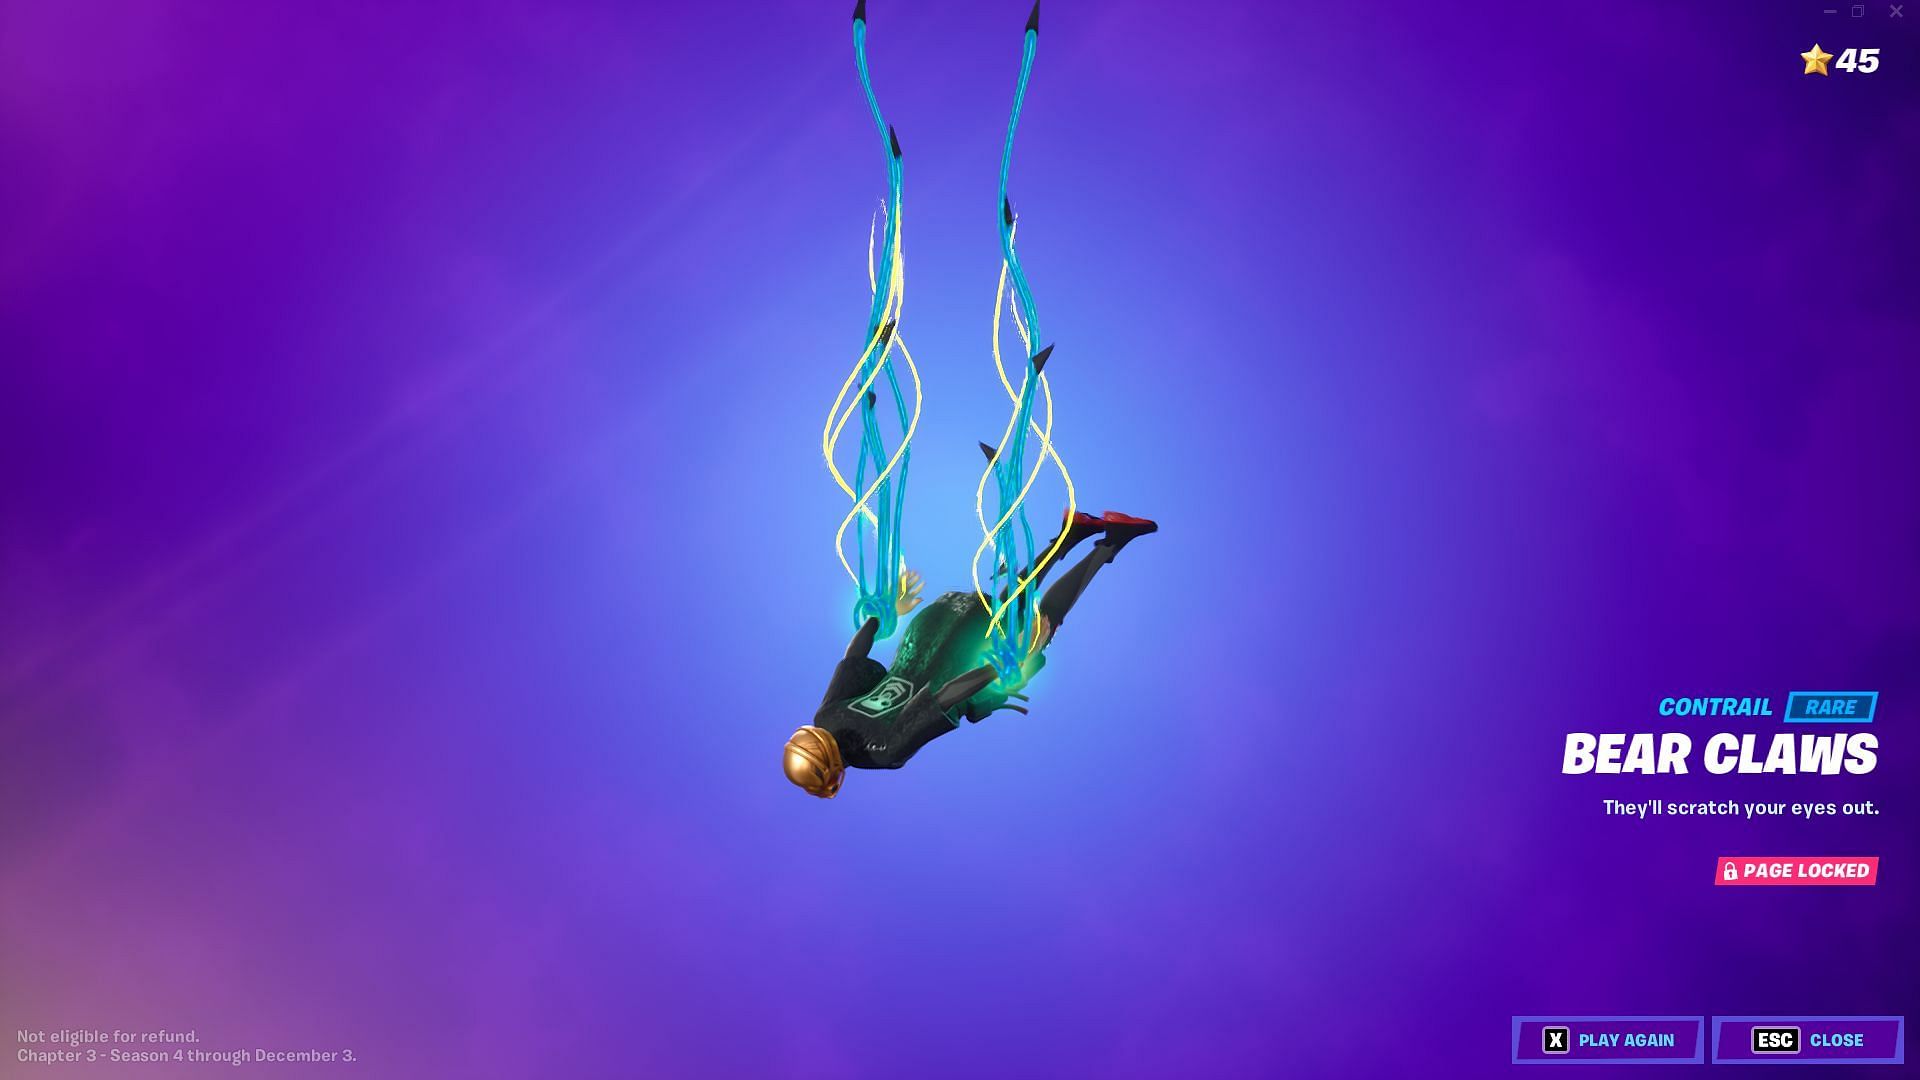 One of the best contrails in the battle pass (Image via Epic Games)